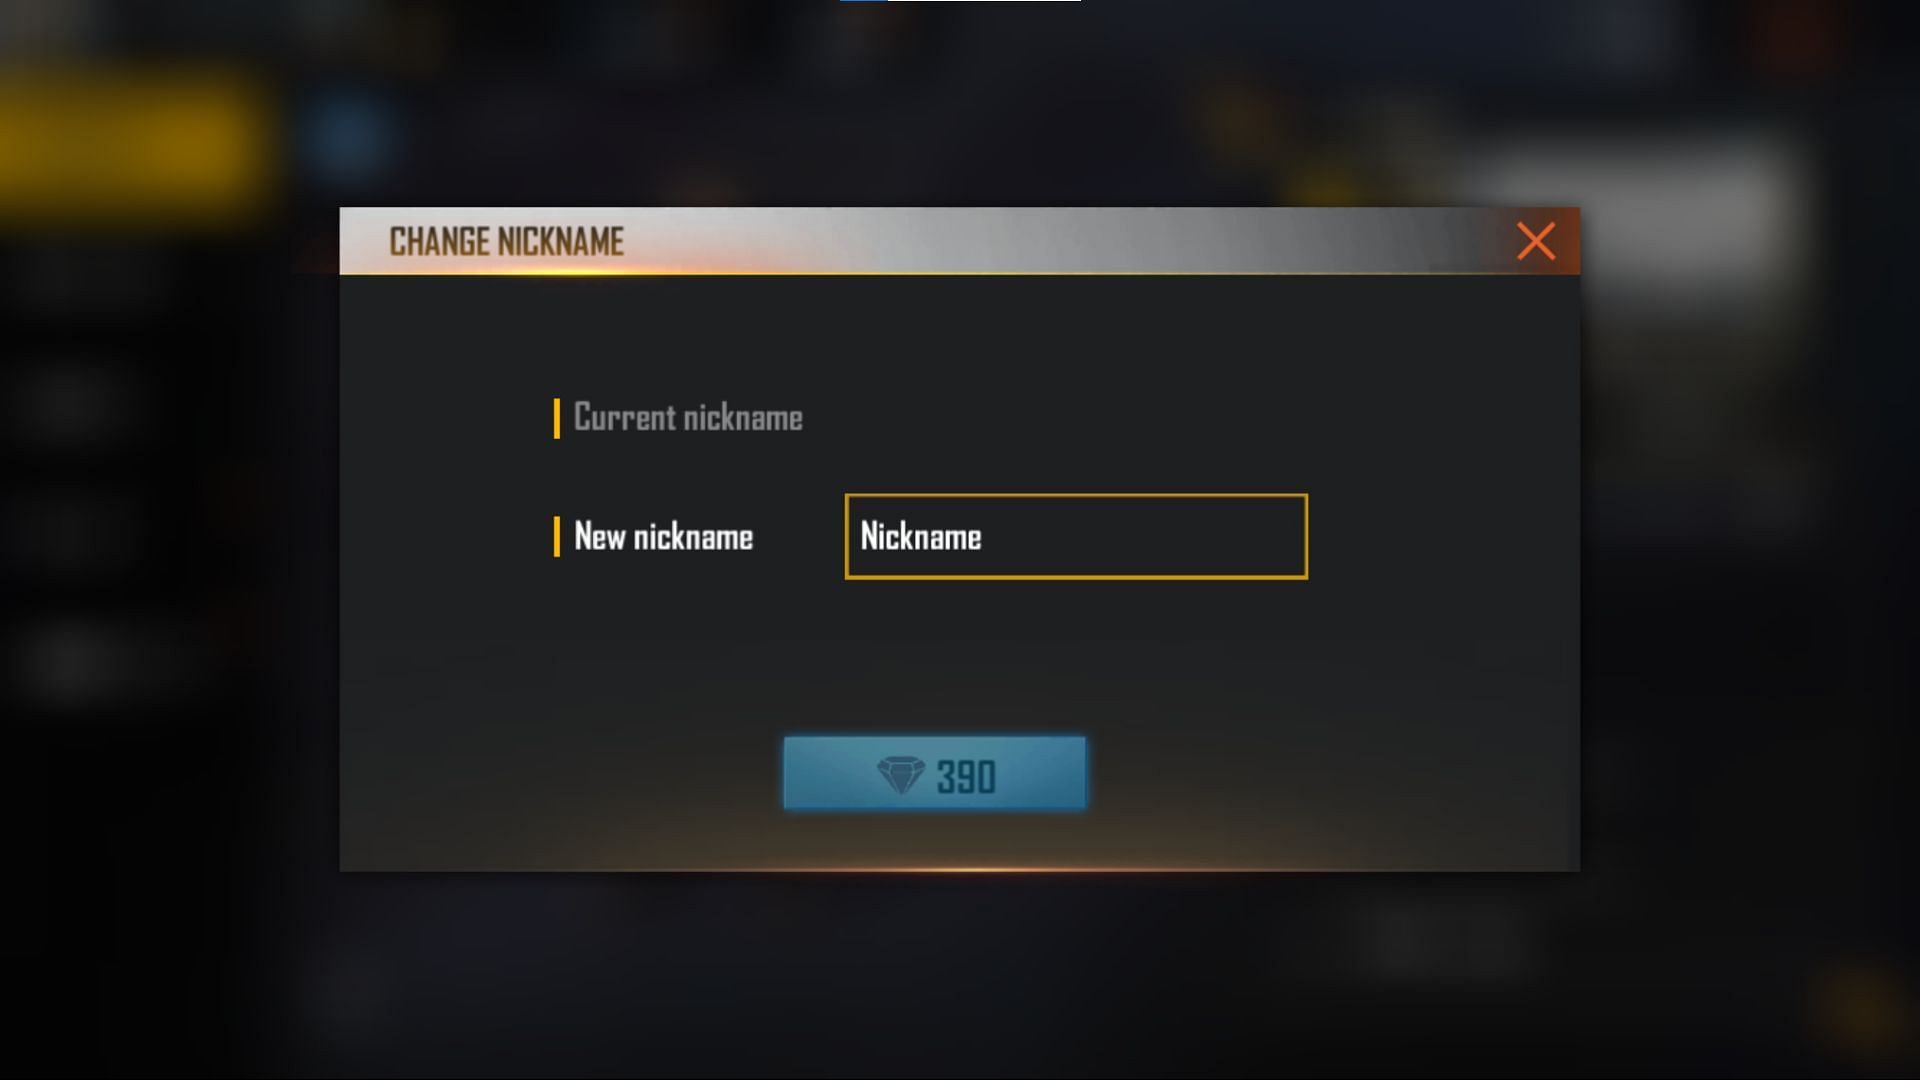 Gamers can enter the required name into the text box appearing on their screens (Image via Garena)